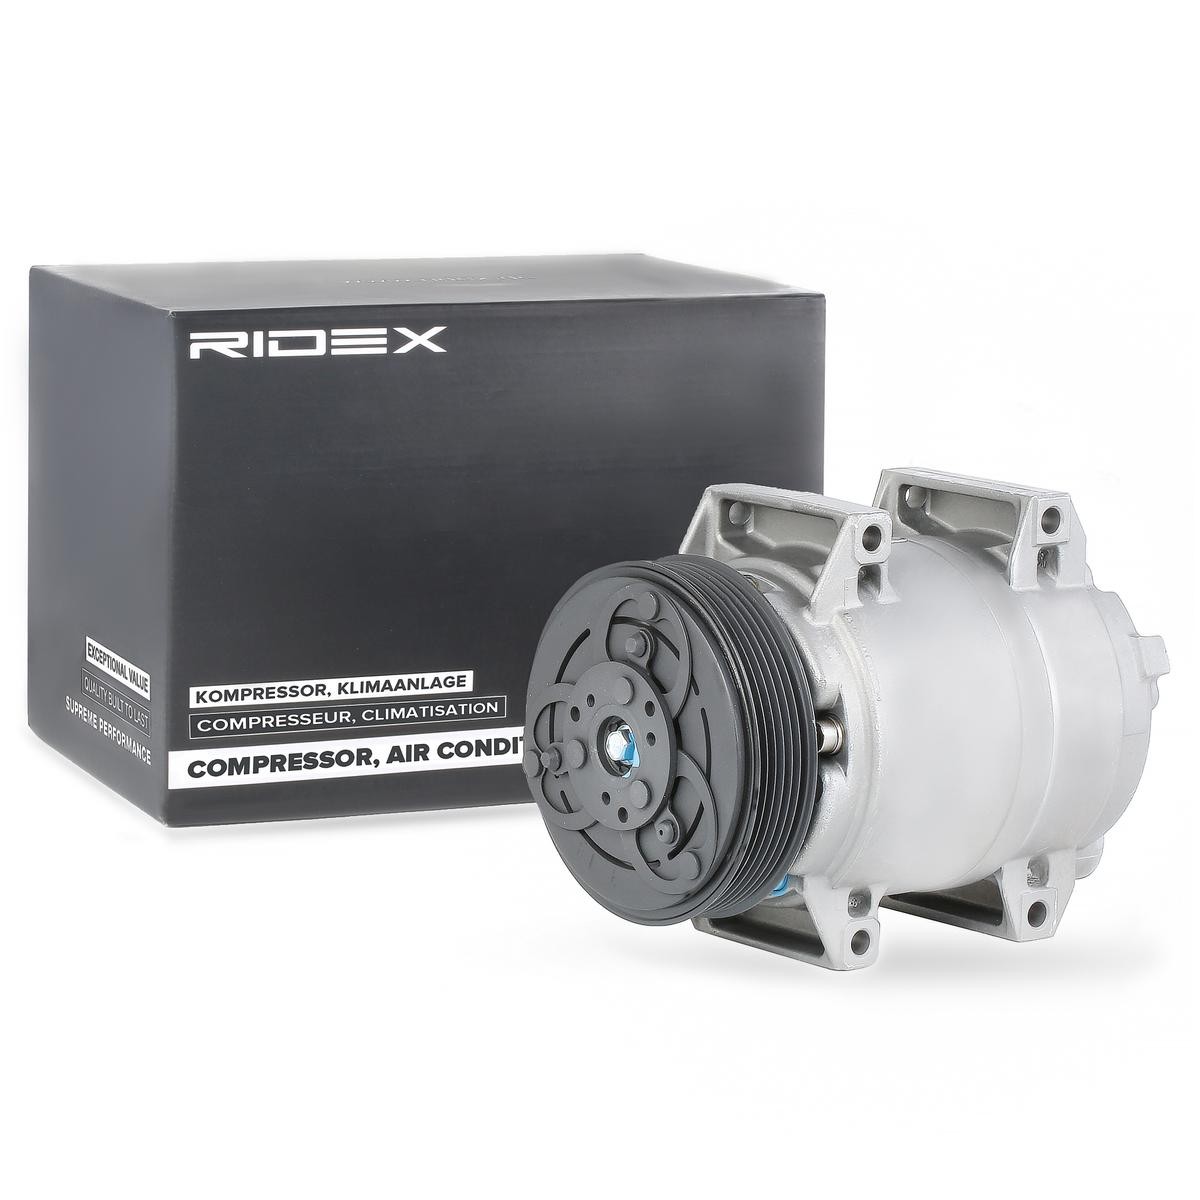 RIDEX 447K0081 Air conditioning compressor DKS17D, PAG 100, R 134a, with PAG compressor oil